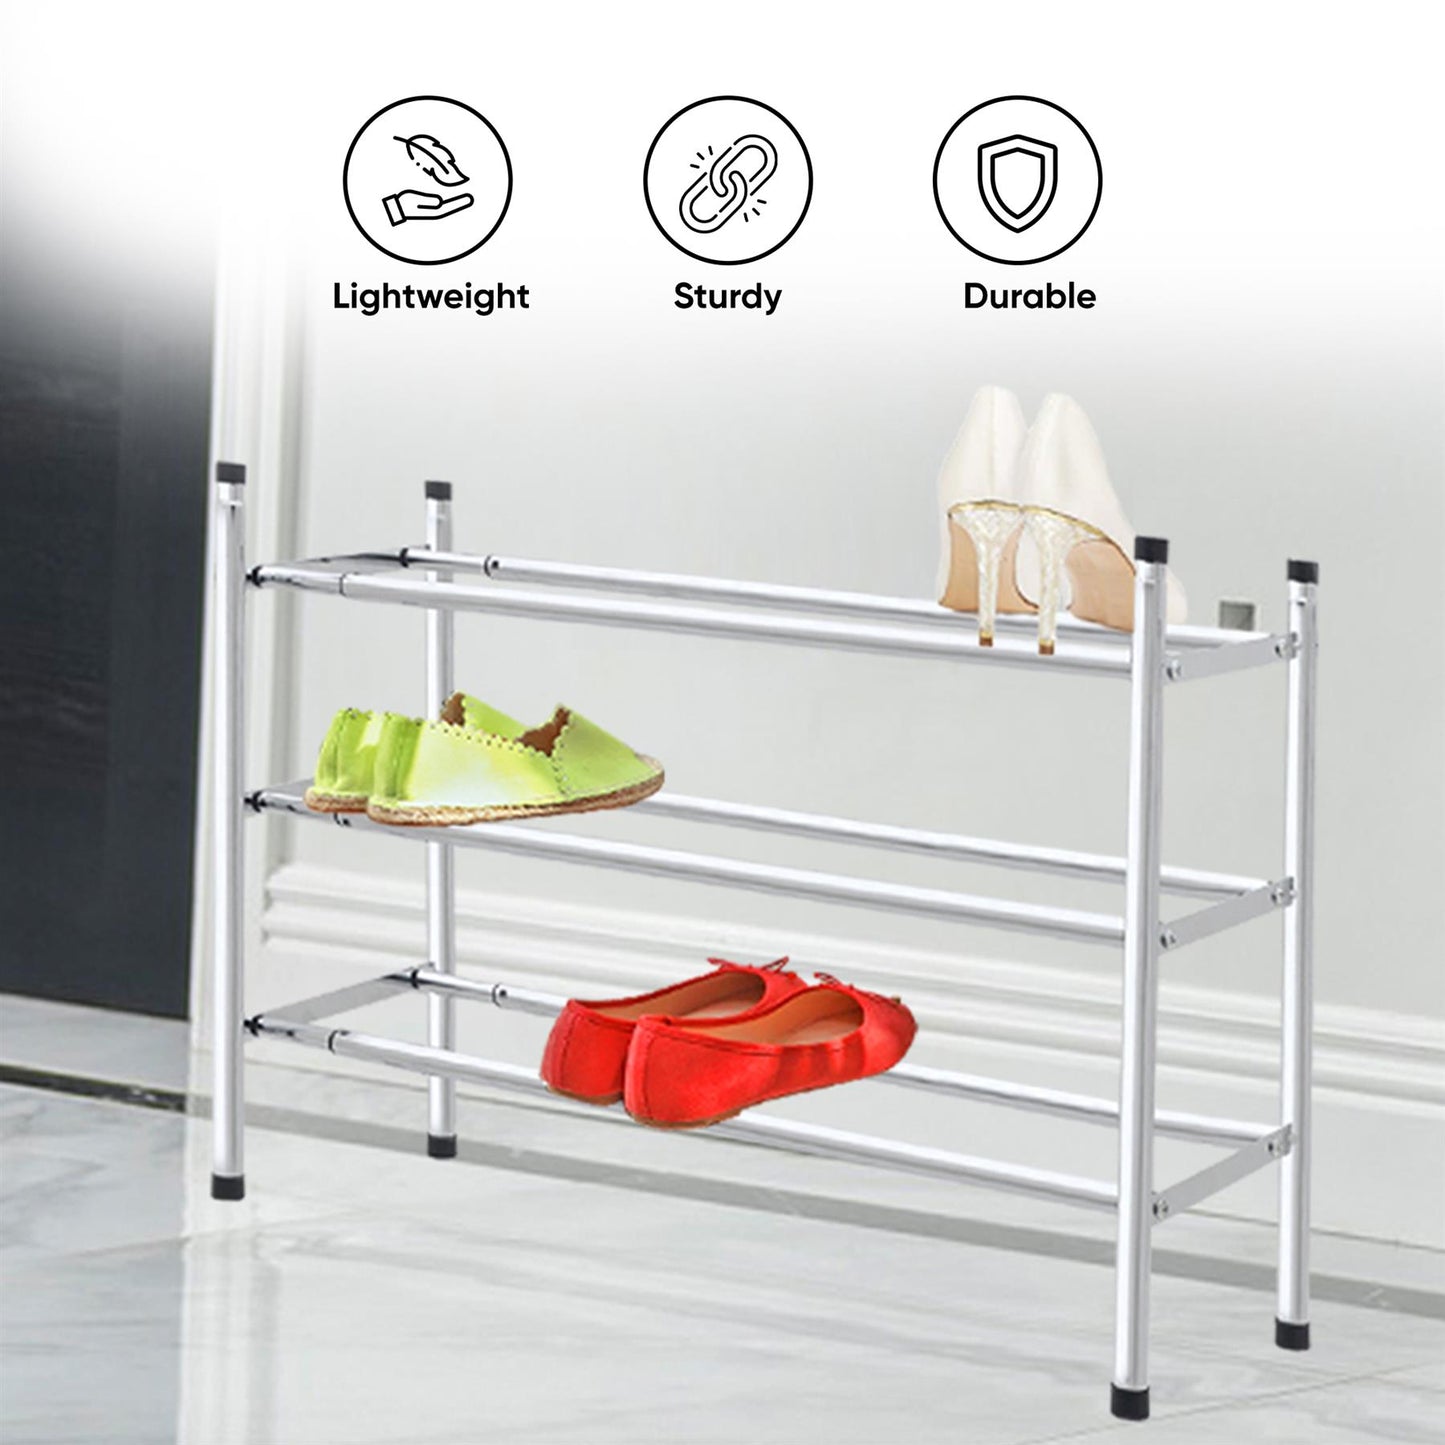 Sturdy 3-Tier Shoe Rack With Chrome Finish Holds Up To 18 Pairs Including Boots And Trainers